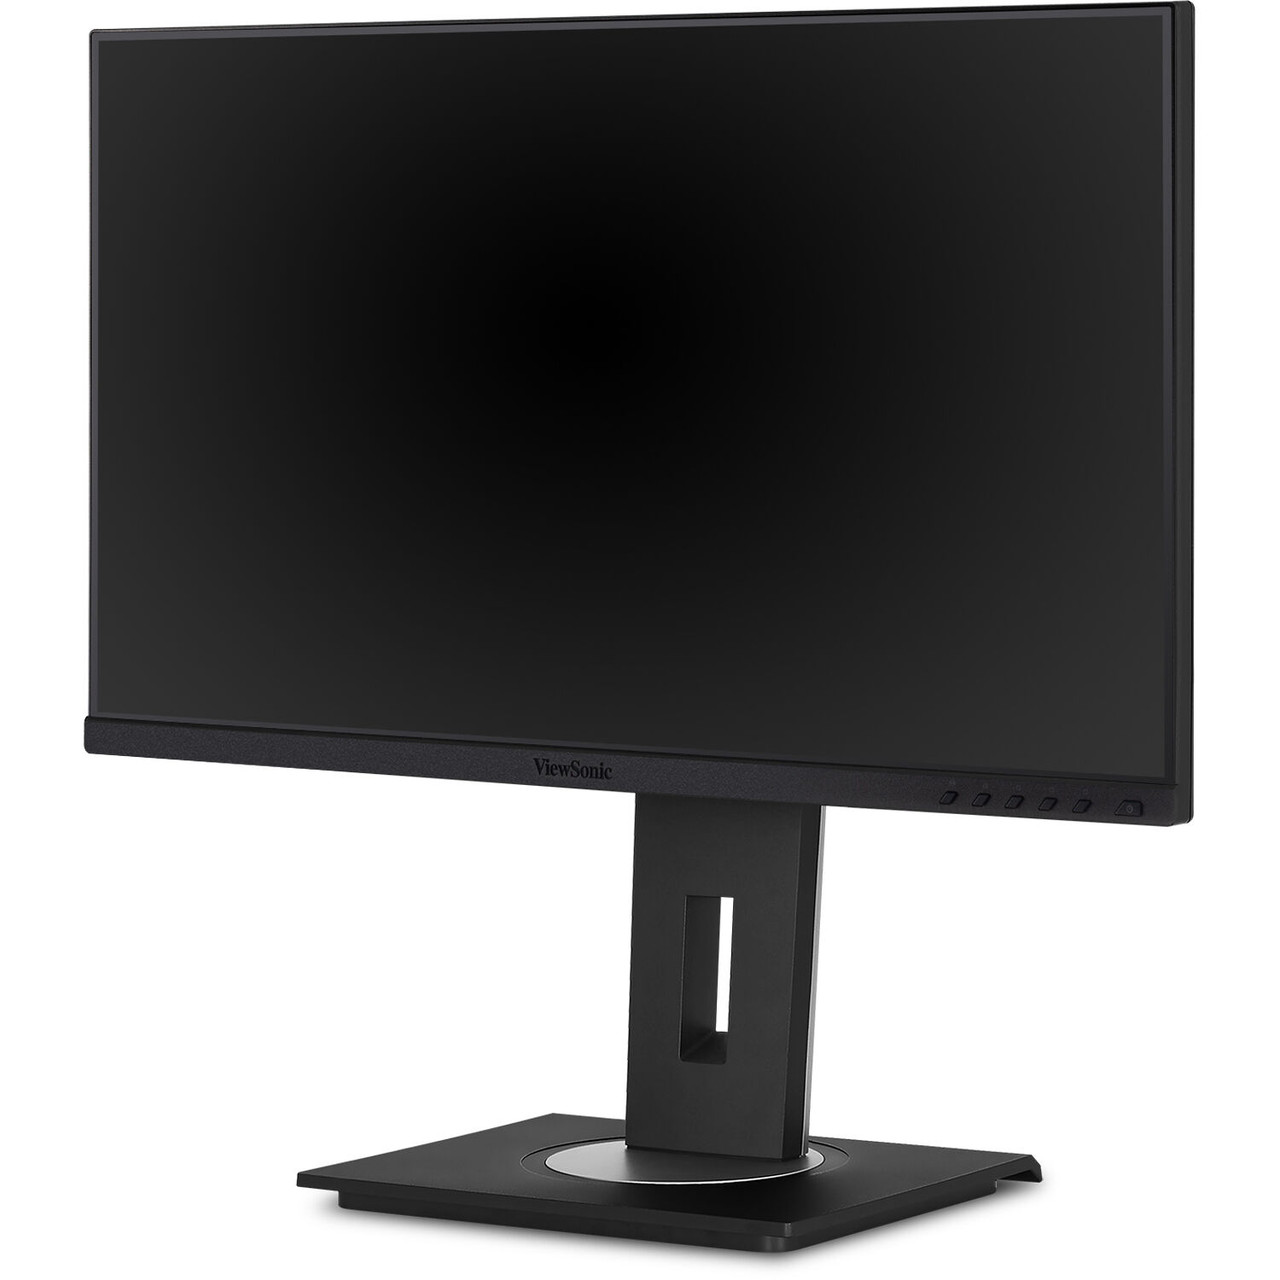 ViewSonic VG2748A-R 27" Ultra-Thin Bezels for Home and Office IPS 1080p Ergonomic Monitor - Certified RefurbishedViewSonic VG2748A-R 27 " Ultra-Thin Bezels for Home and Office IPS 1080p Ergonomic Monitor - Certified Refurbished